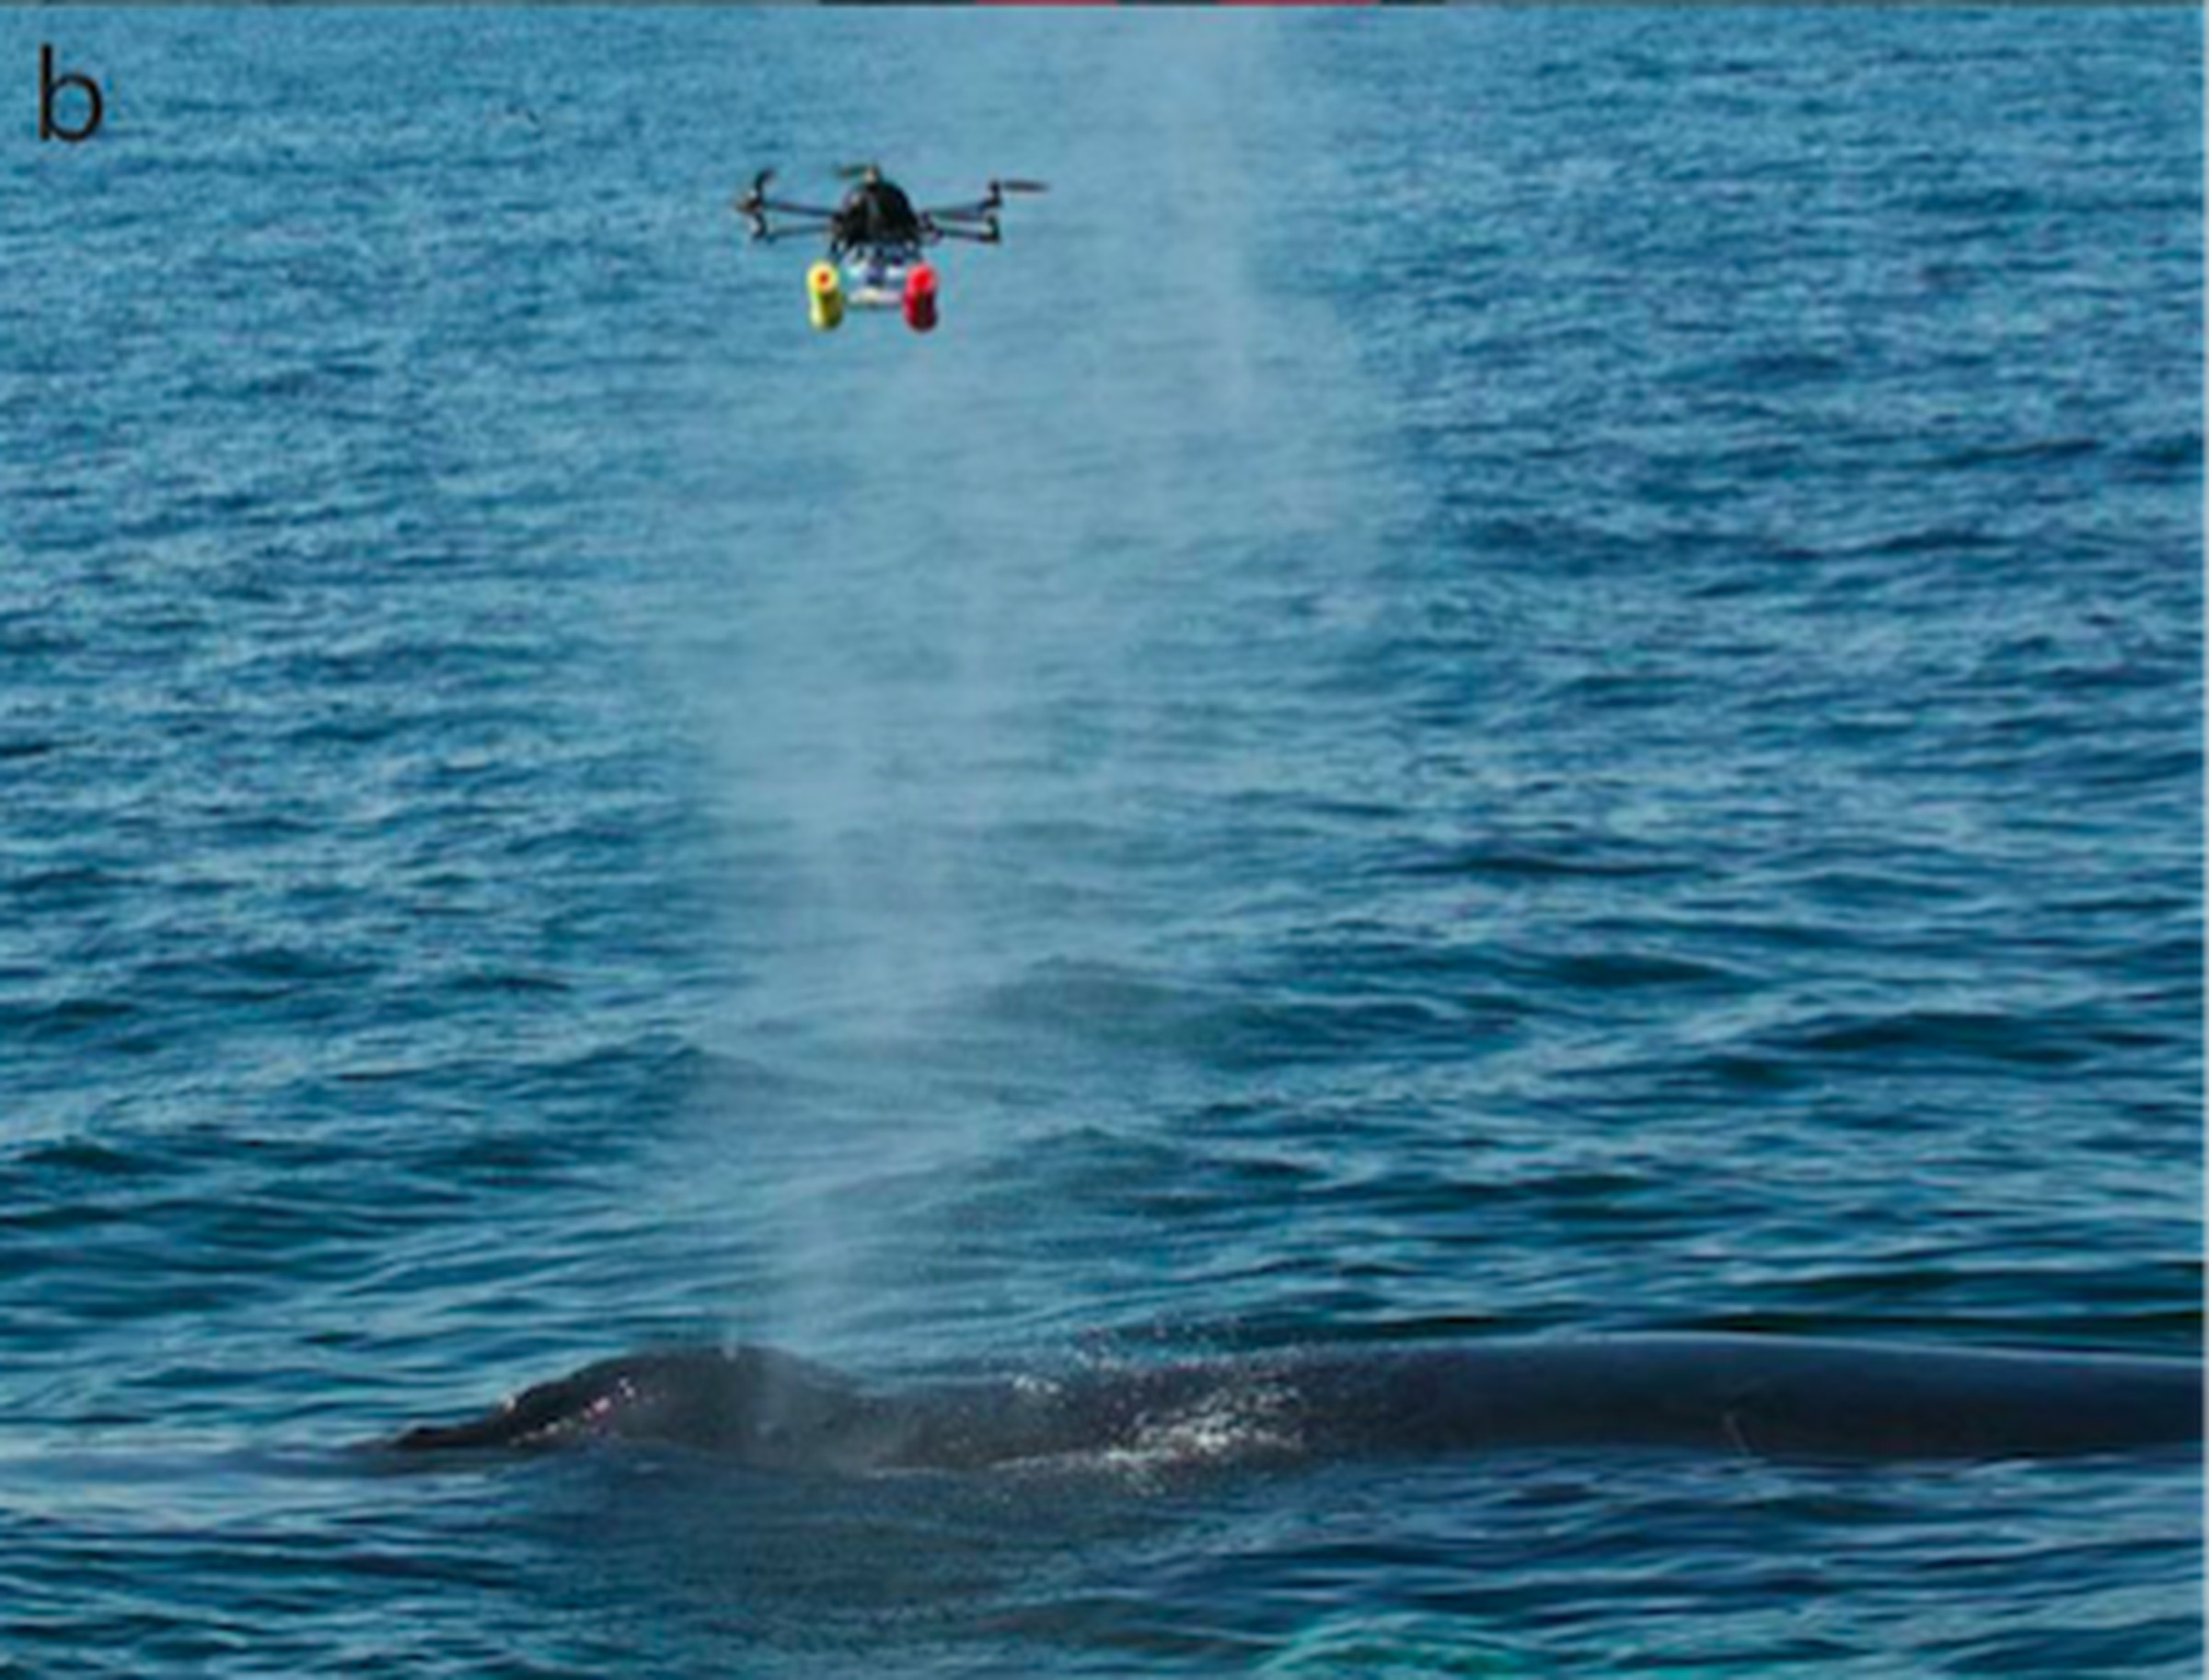 The hexacopter collecting blow from a humpback whale off Cape Cod.